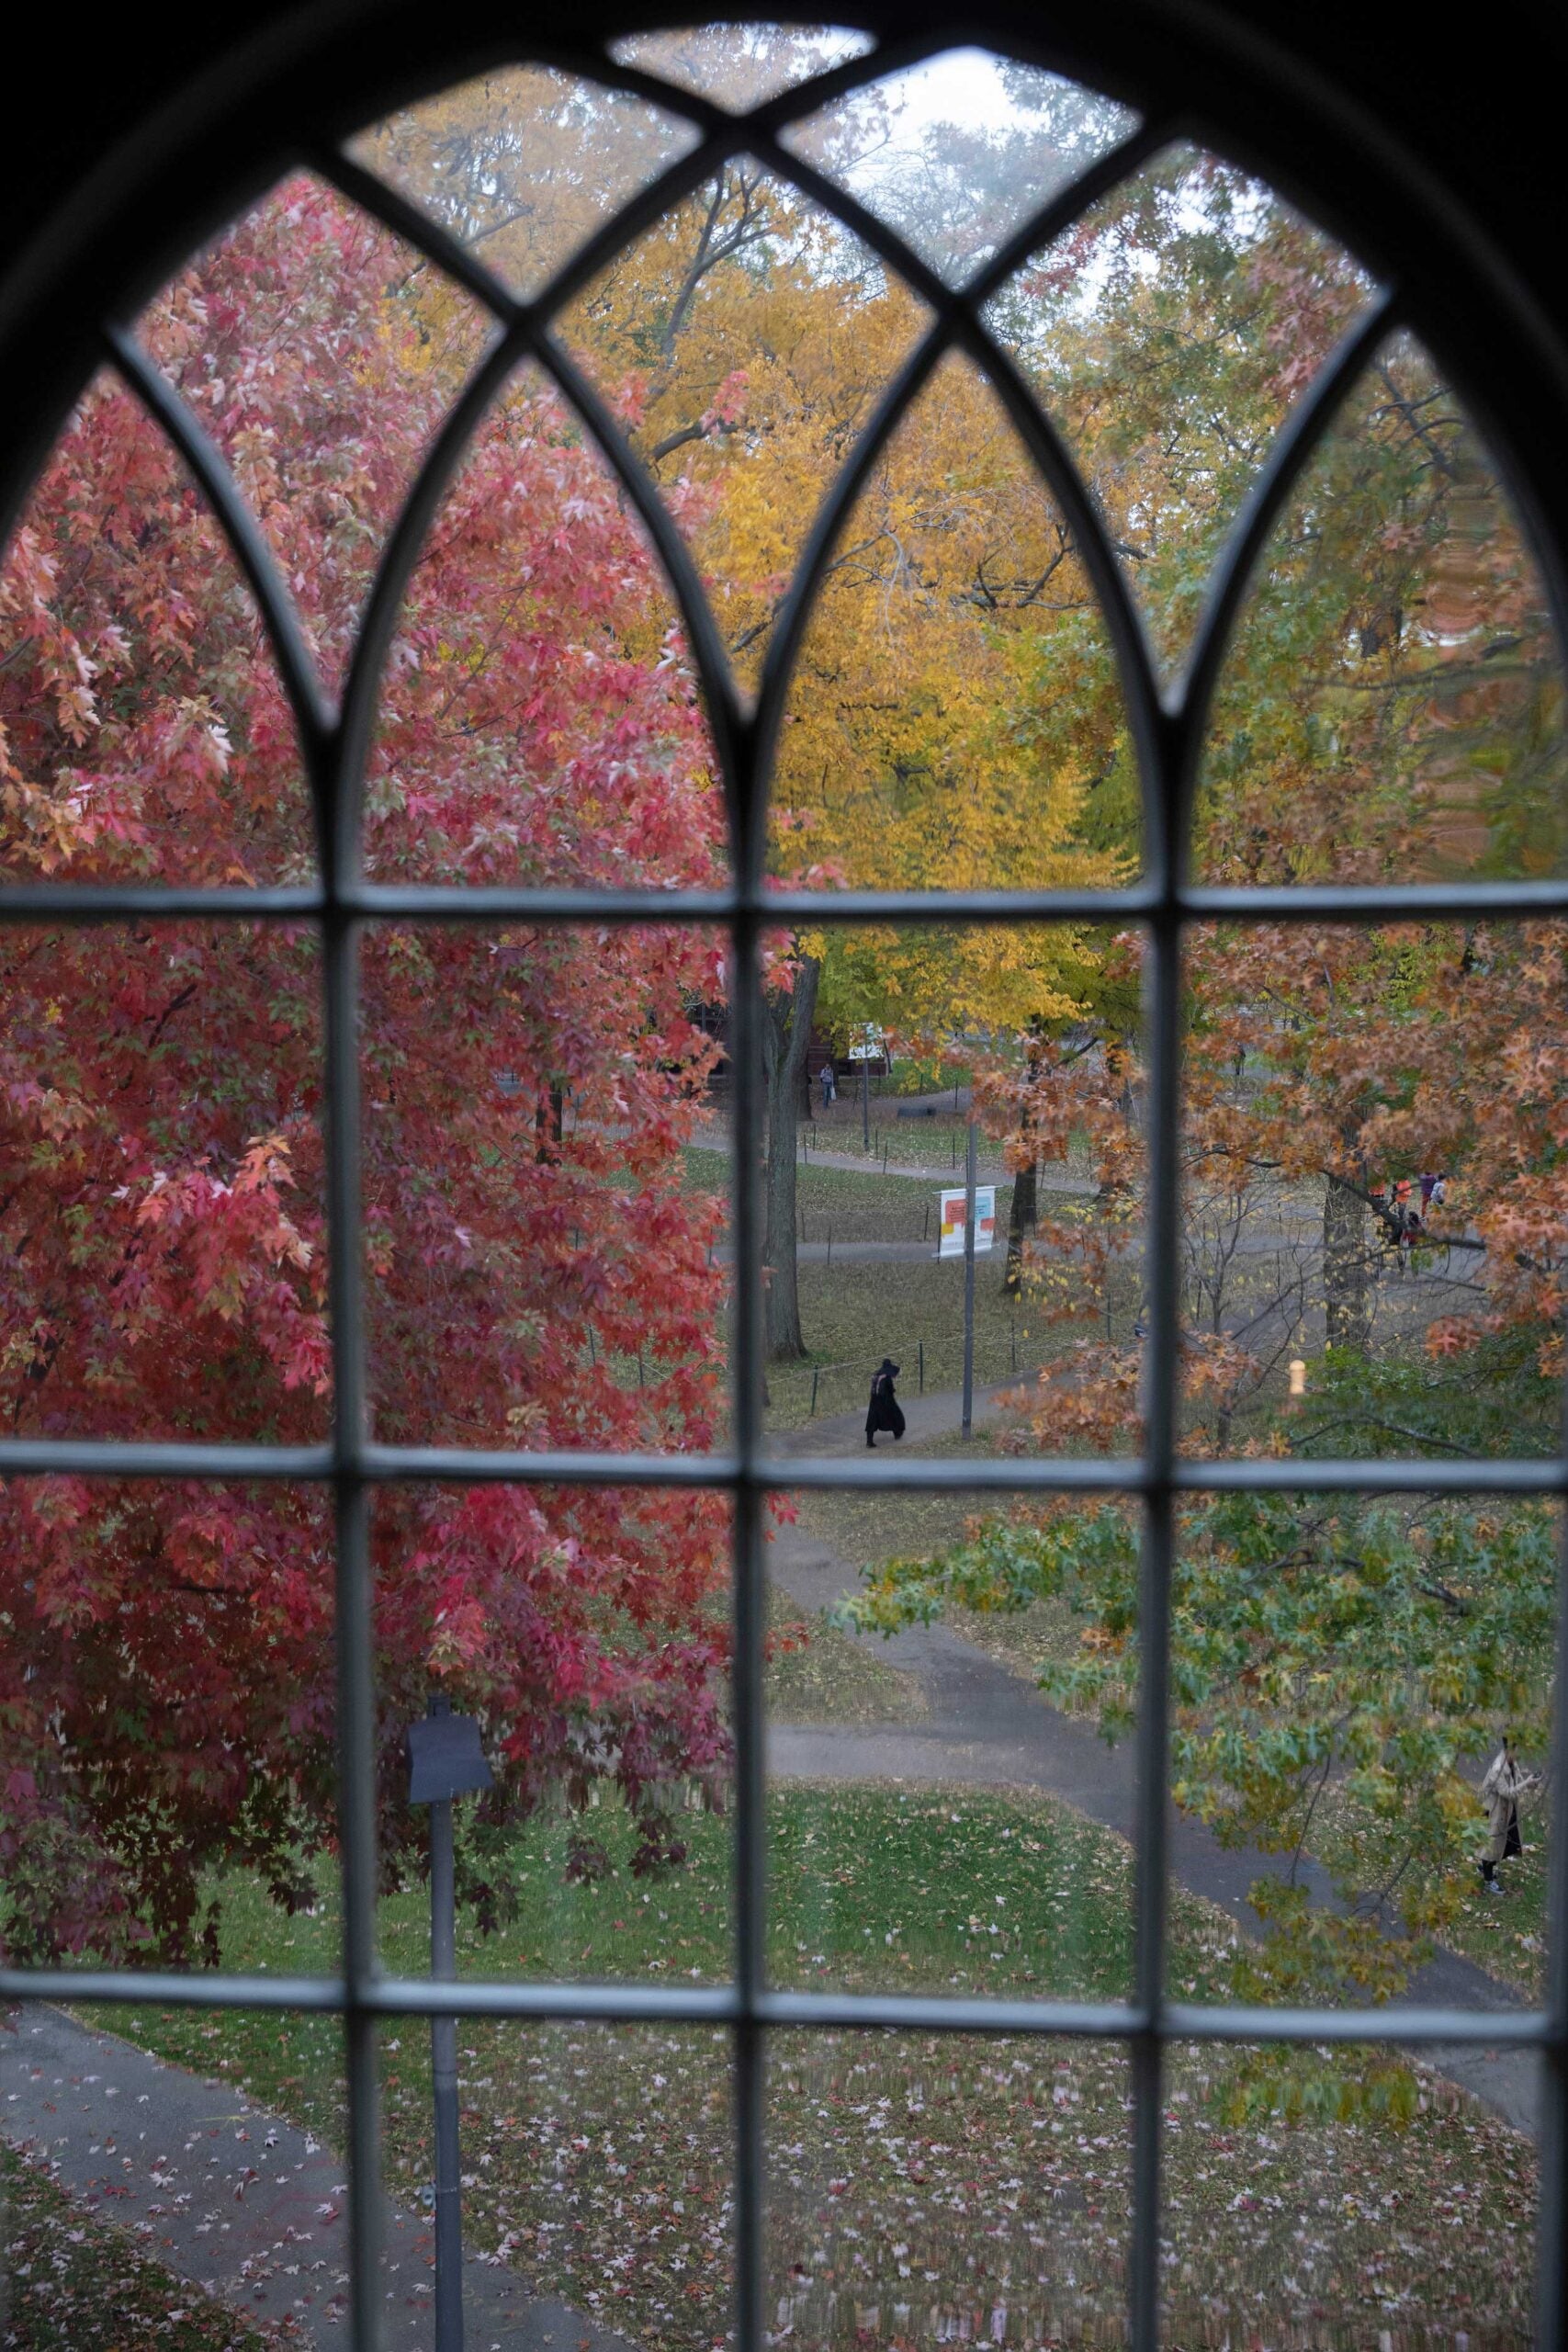 Looking out a framed window pane at fall foliage.